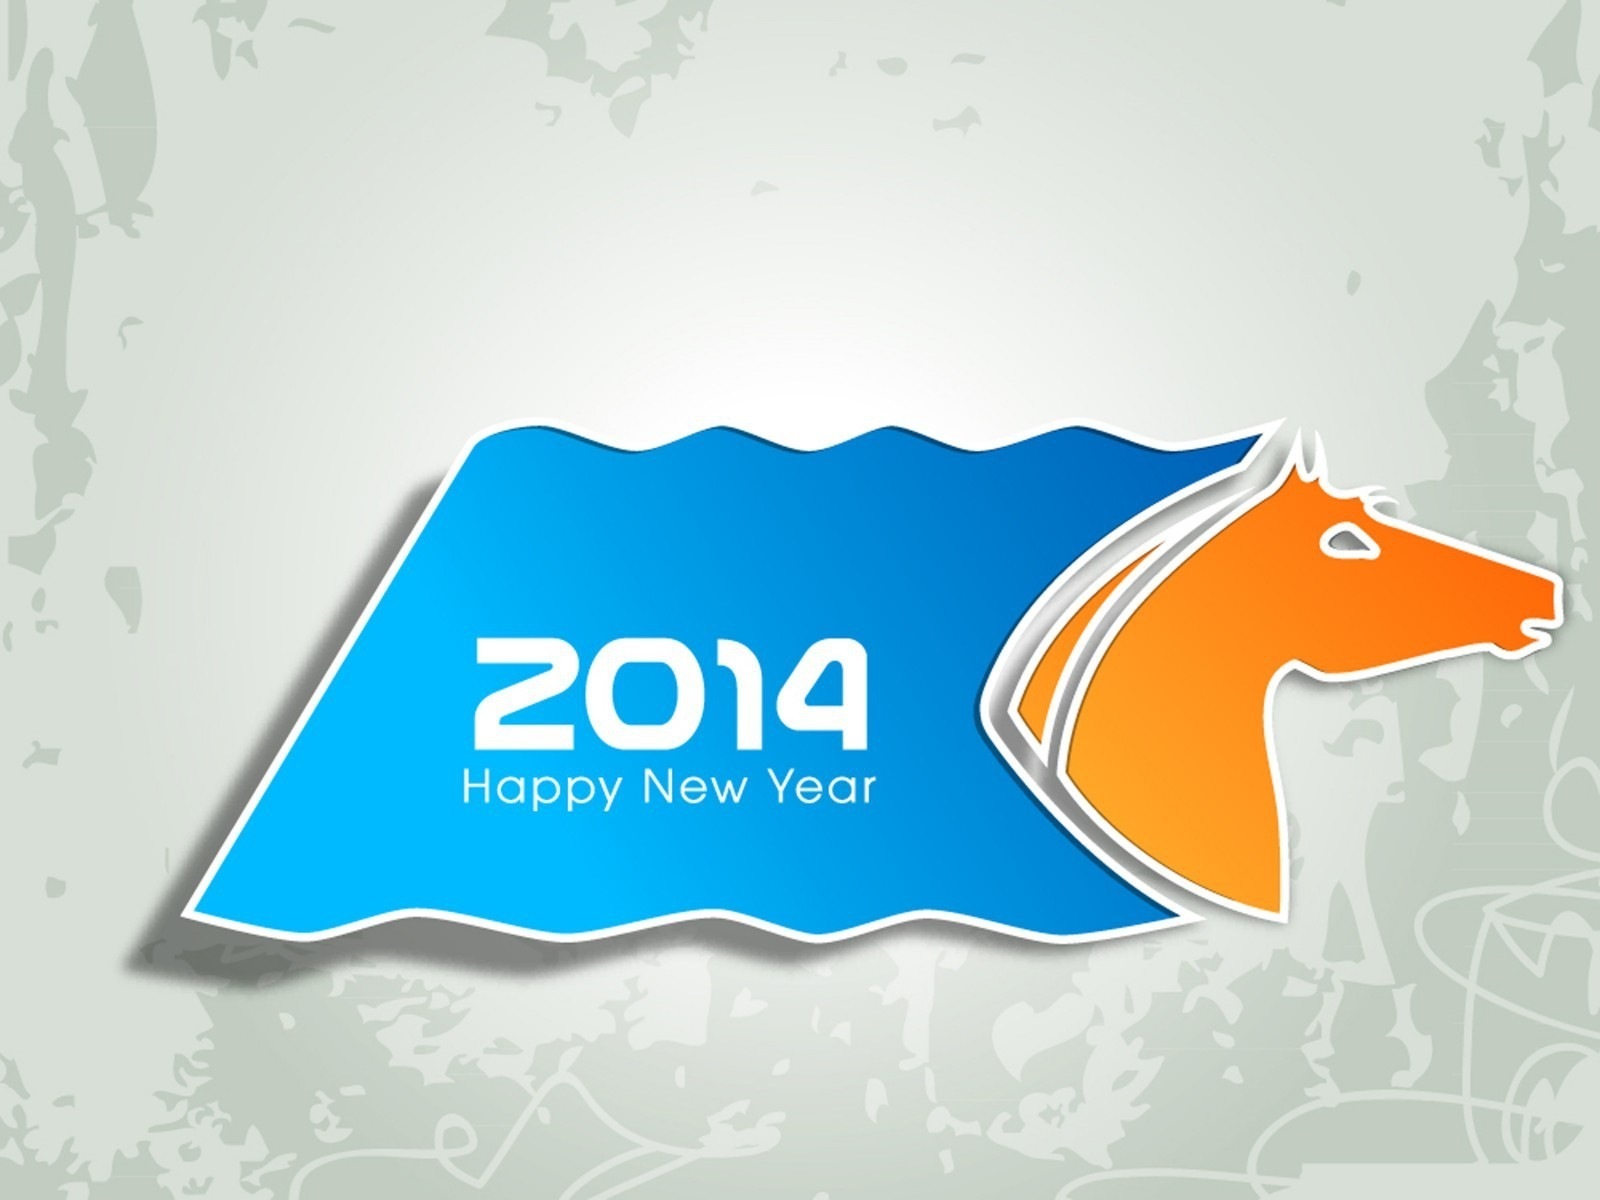 2014 New Year Theme HD Wallpapers (1) #10 - 1600x1200